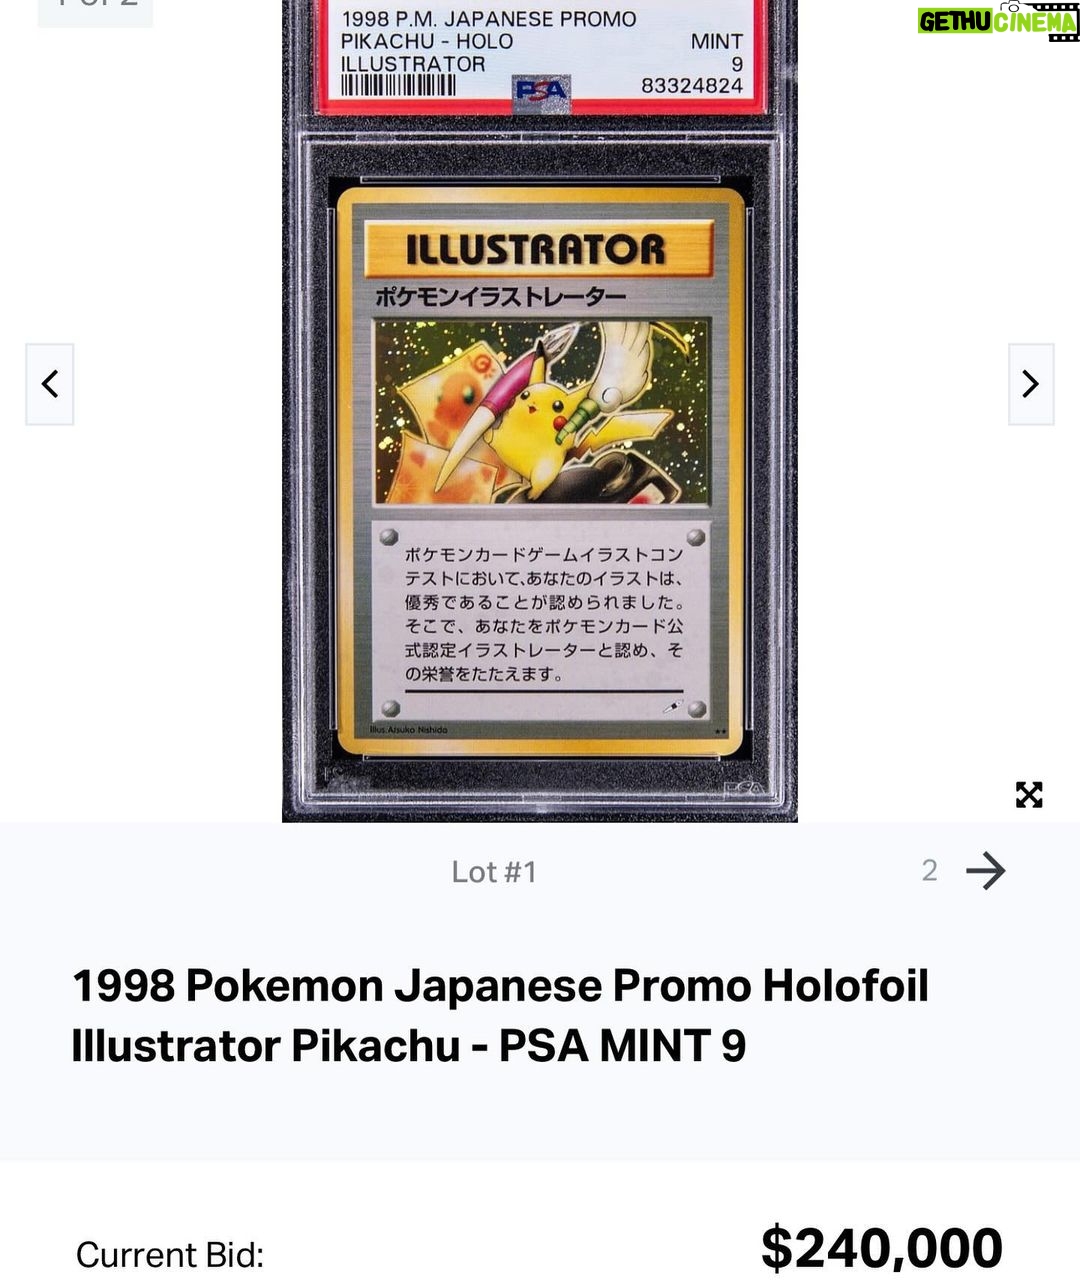 Ultra-Rare Pikachu Illustrator Card up for auction at roughly $500k